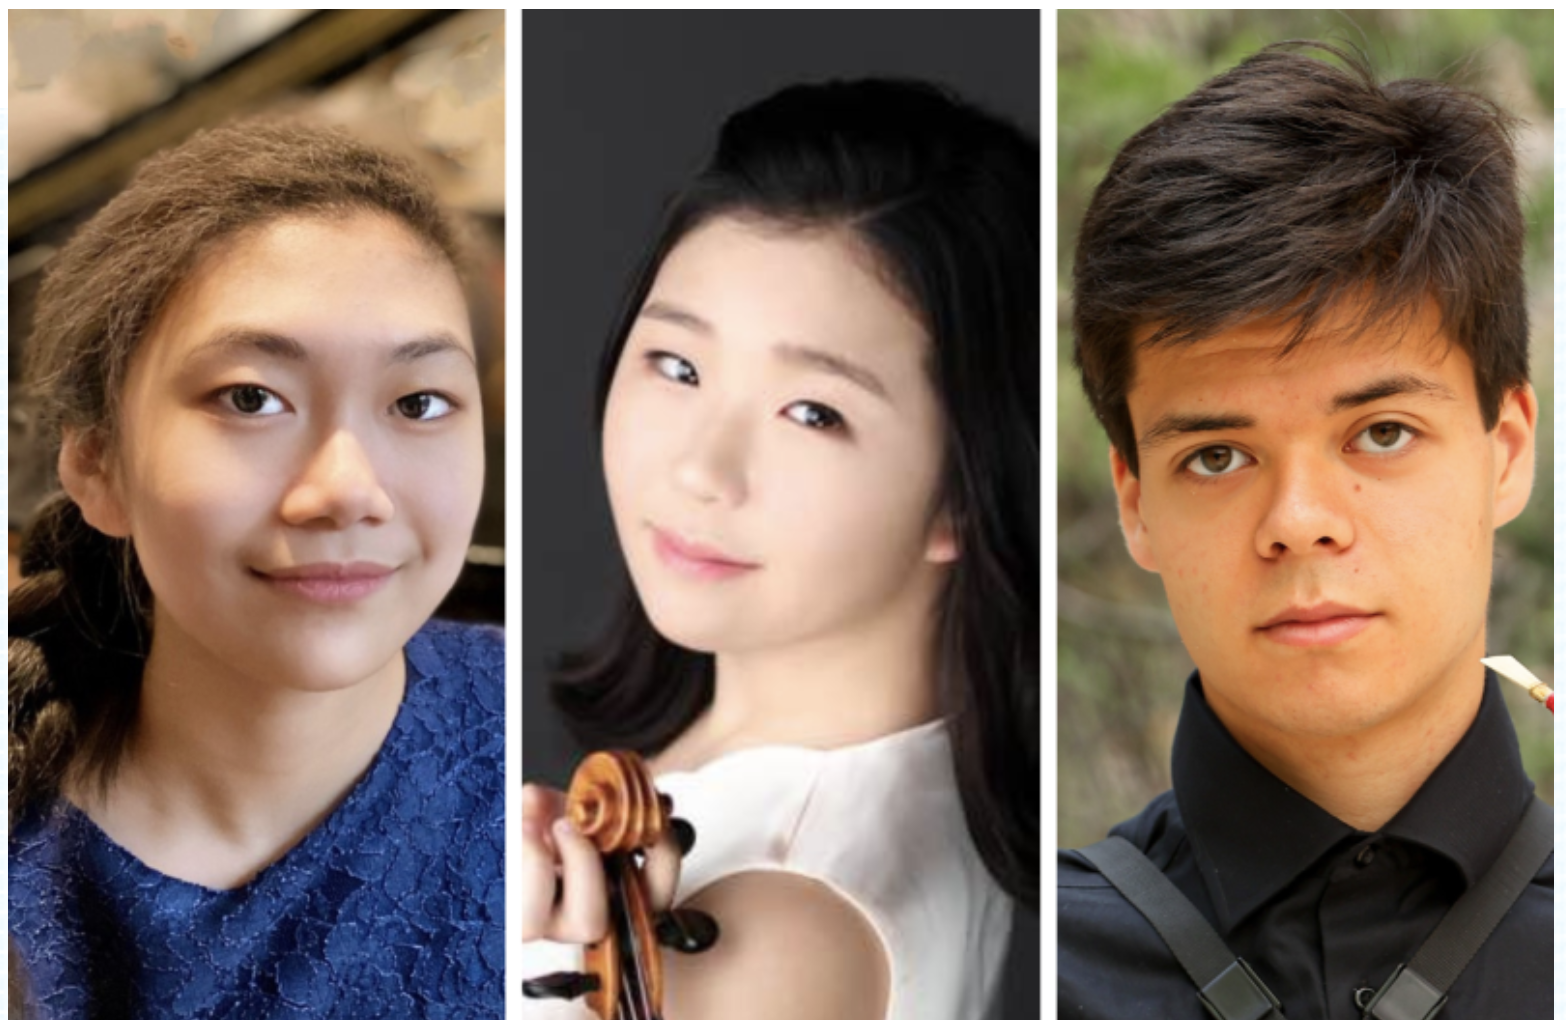 The Vancouver Symphony Orchestra Presents: Brahms's Symphony No. 4 Young Artists' Performance